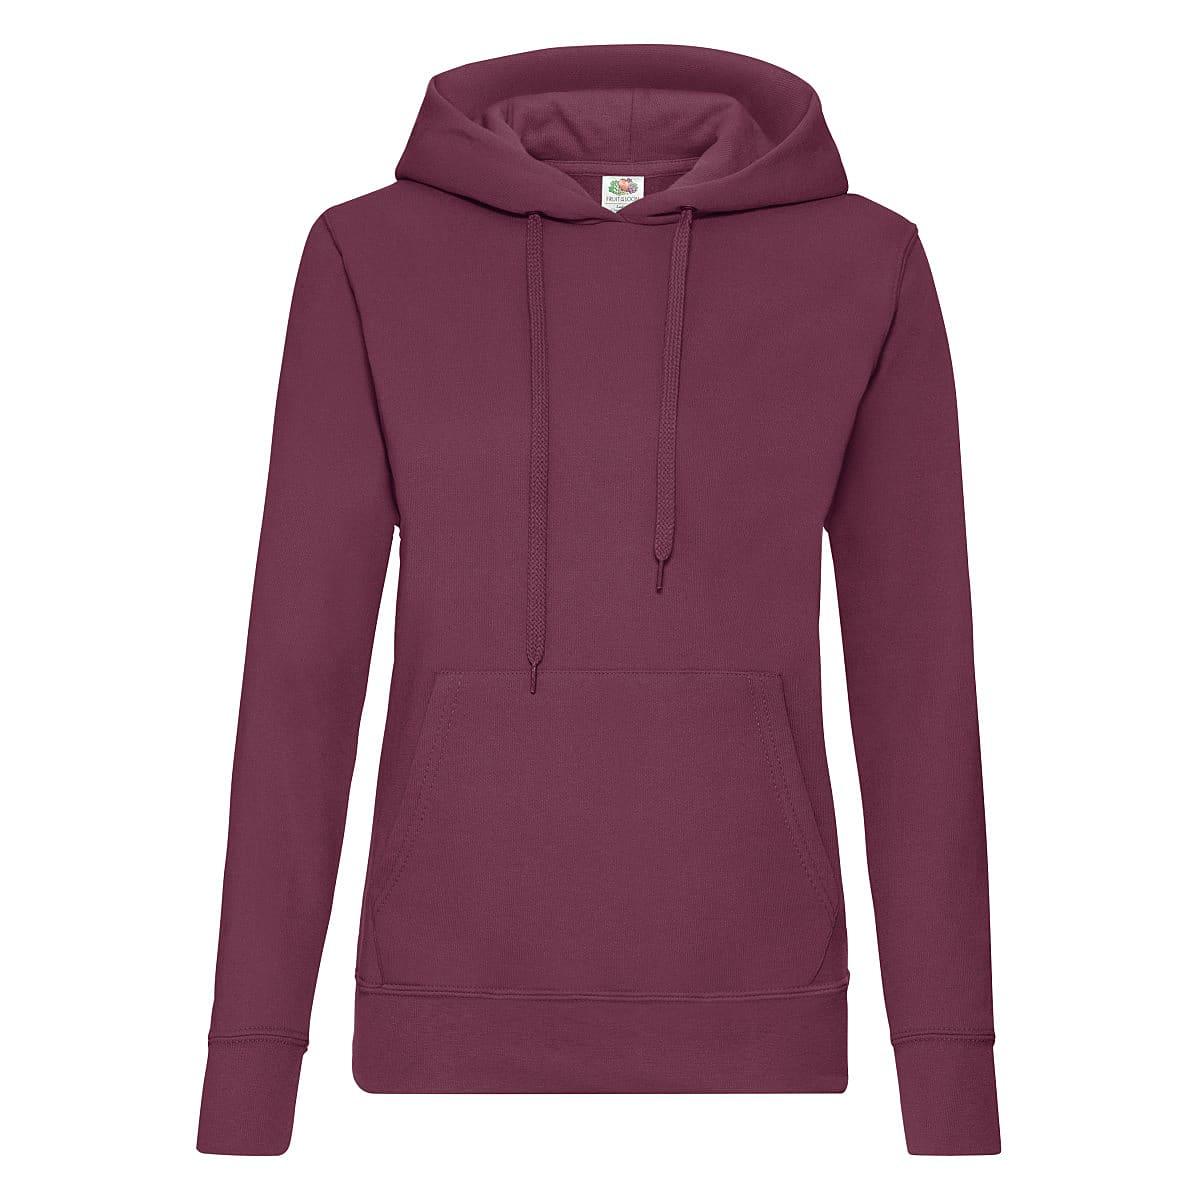 Fruit Of The Loom Lady-Fit Classic Hoodie in Burgundy (Product Code: 62038)